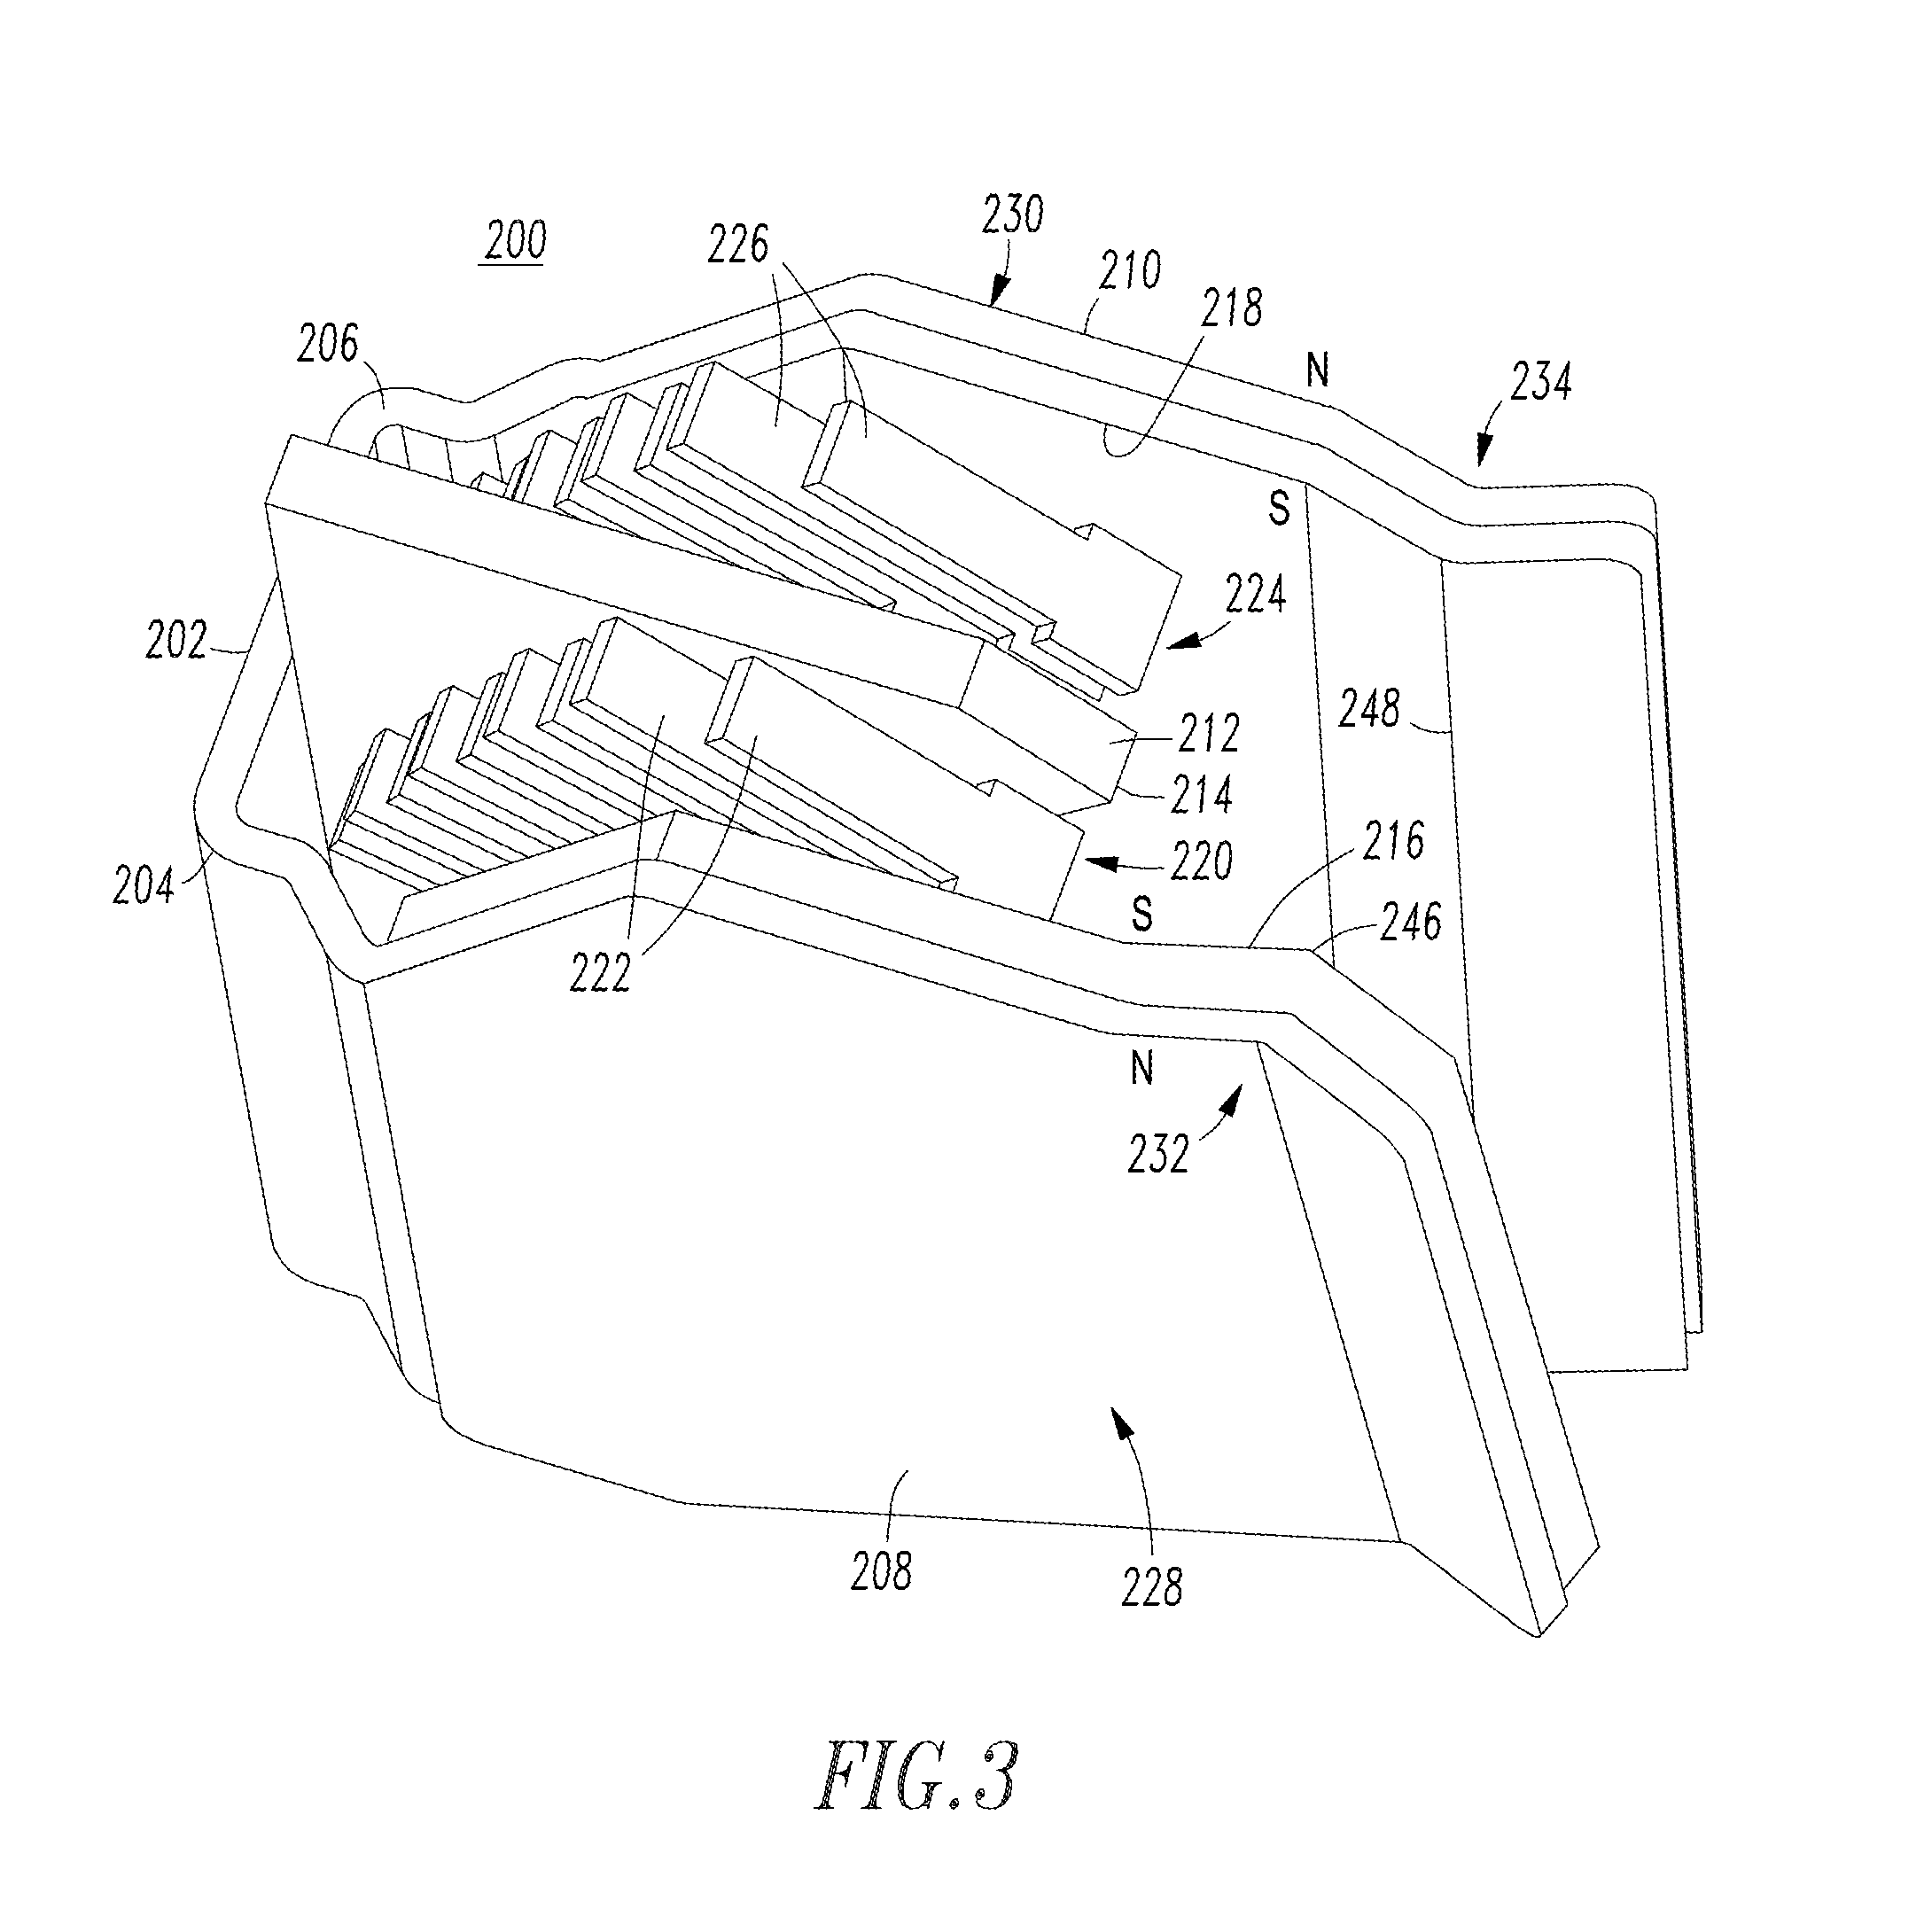 Single direct current arc chute, and bi-directional direct current electrical switching apparatus employing the same